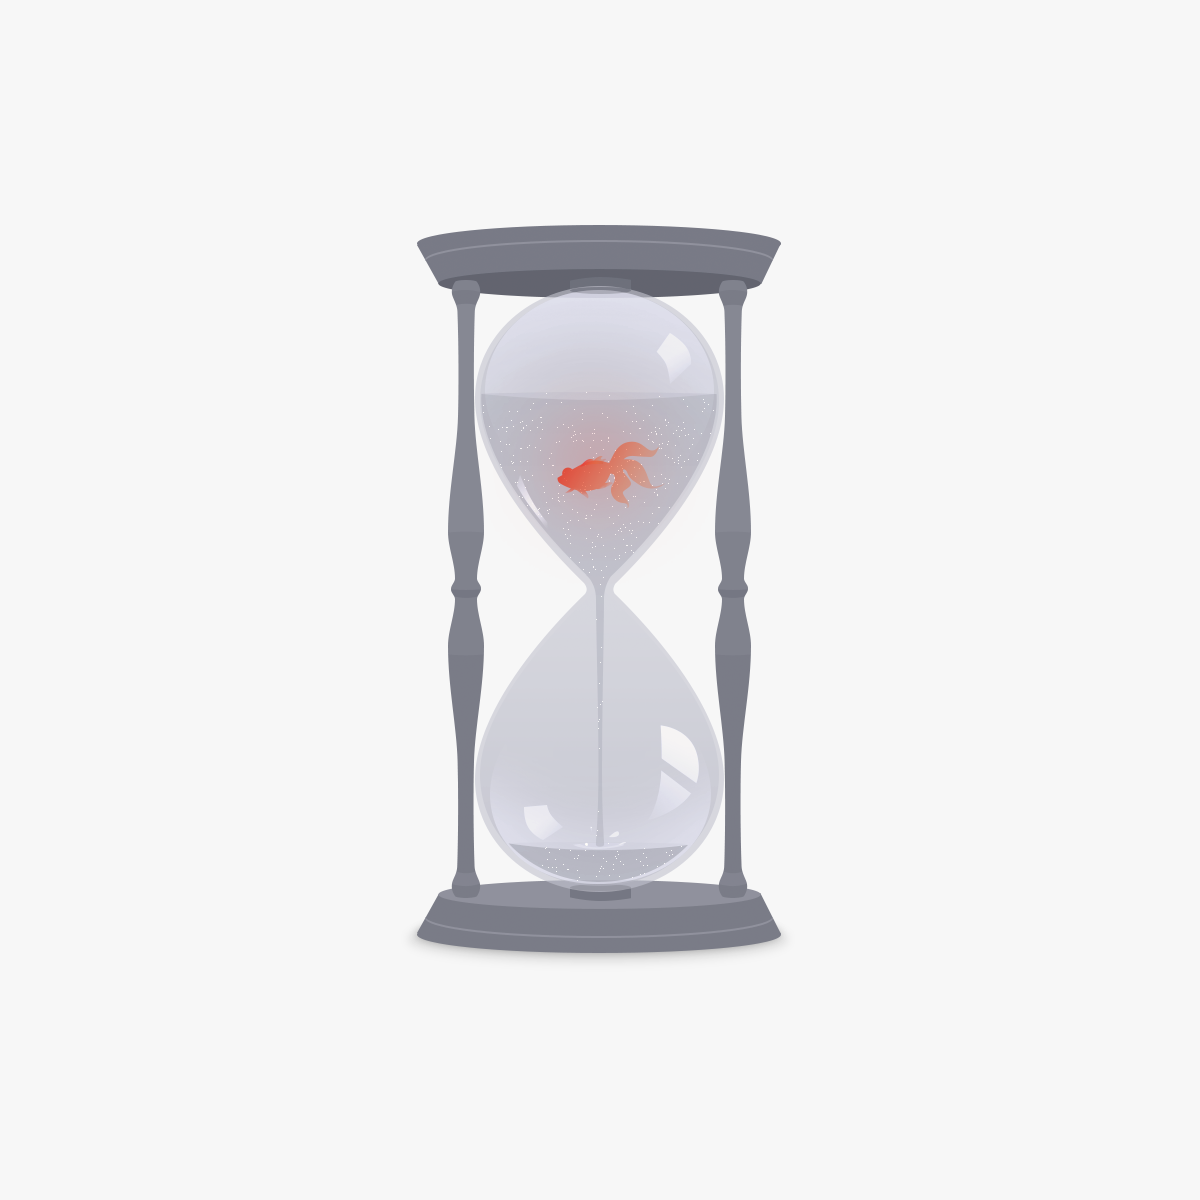 goldfish television Telephone Booth street lamp washer pendule hourglass